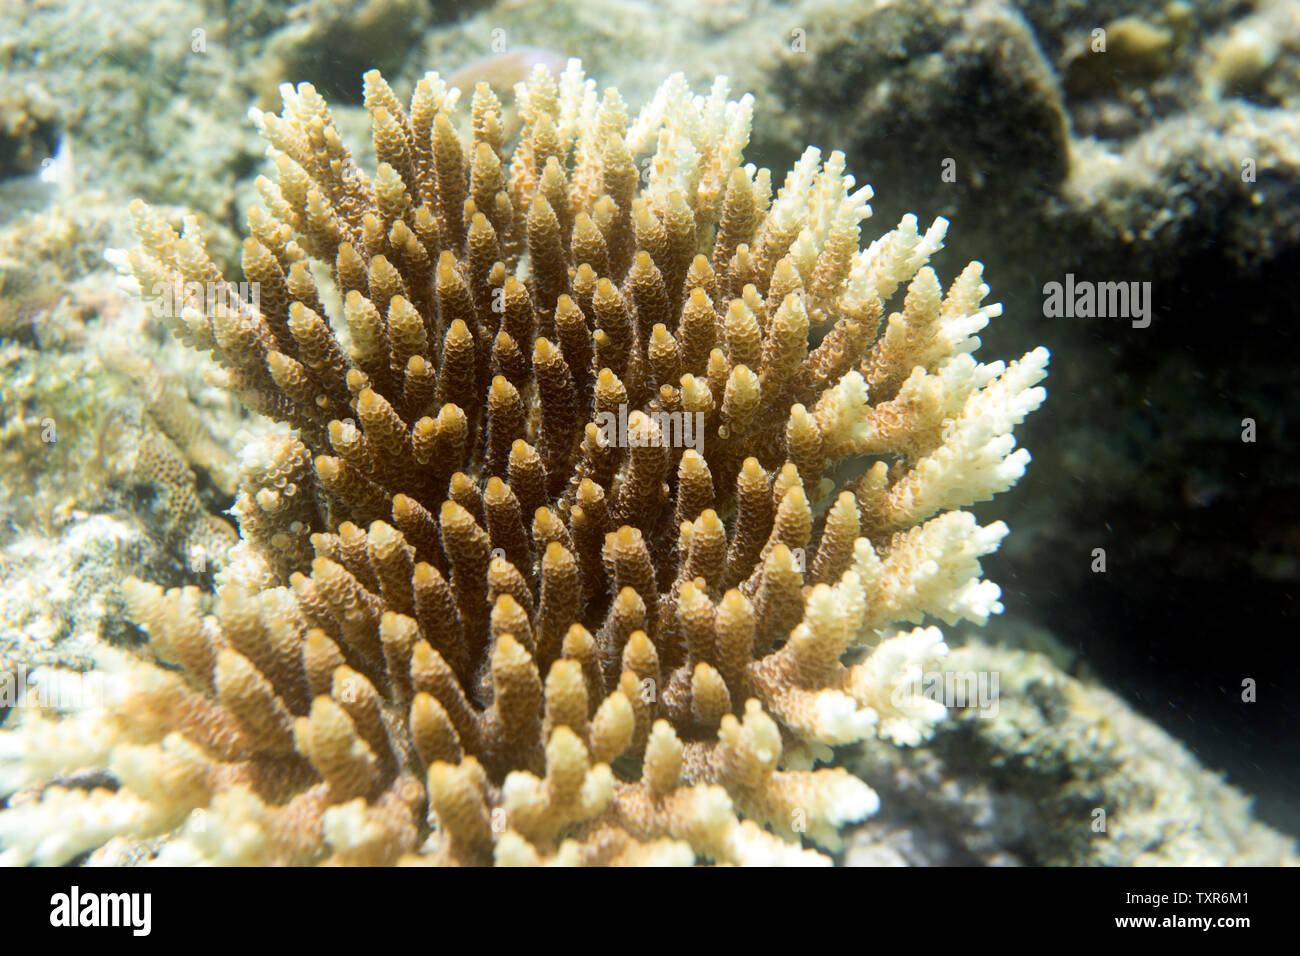 A growing coral in the sea of Togian islands, Indonesia Stock Photo